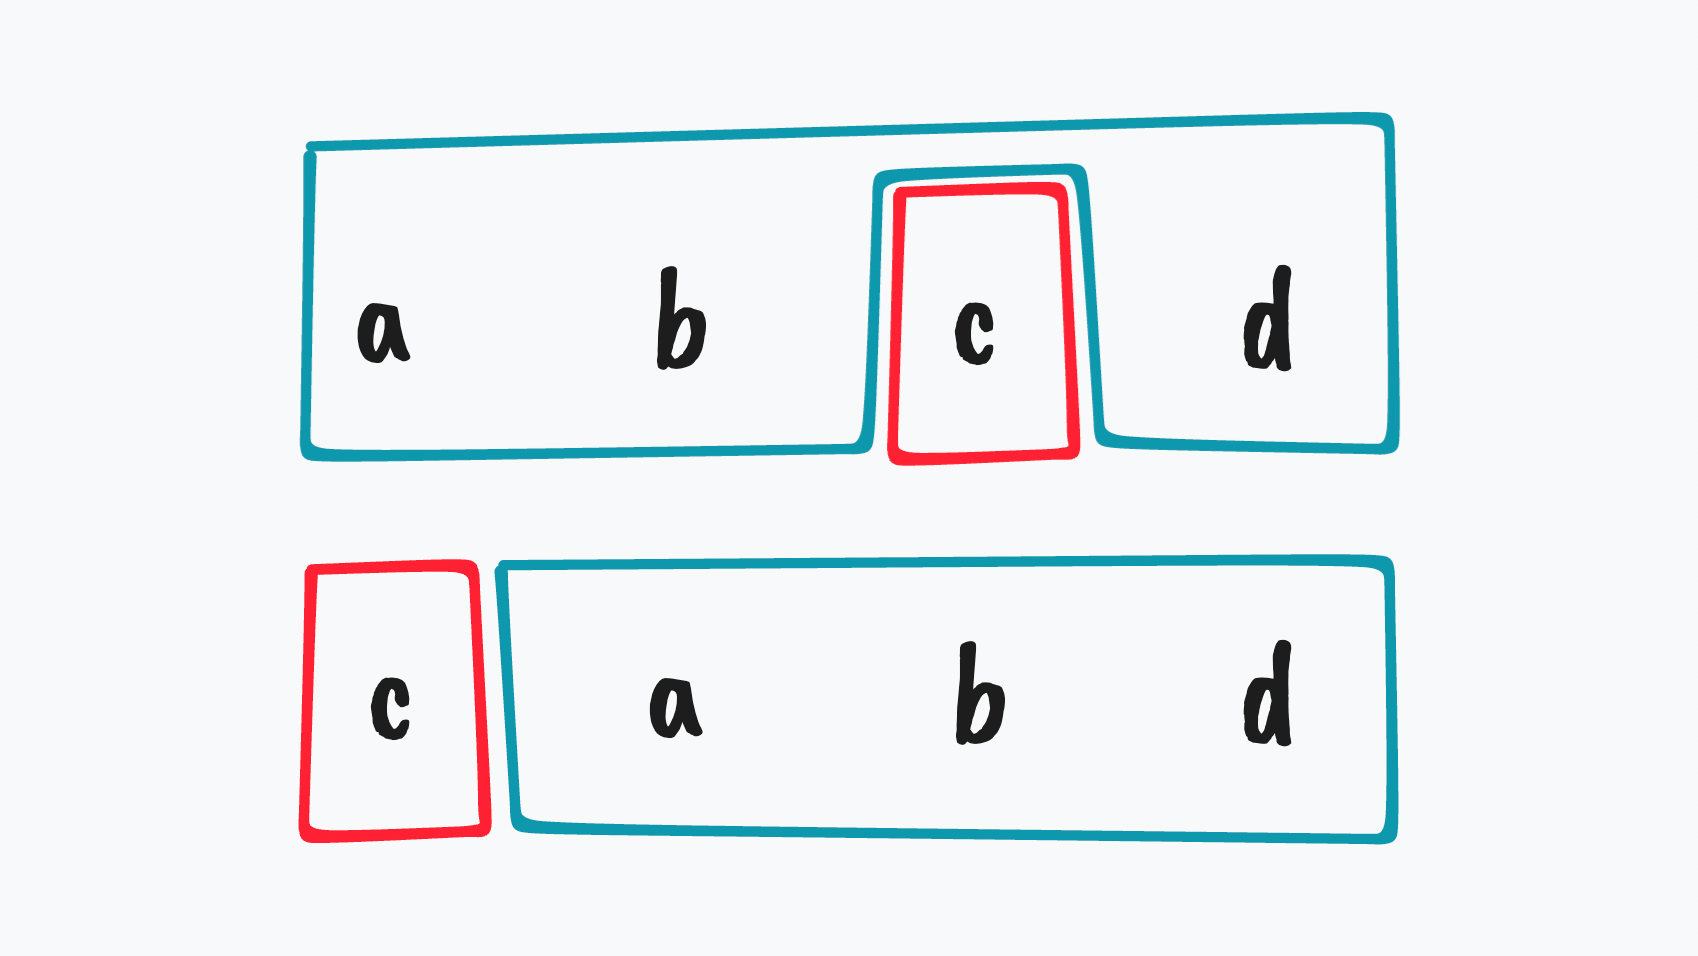 A diagram showing the result of moving c to back in items a, b, c, d.